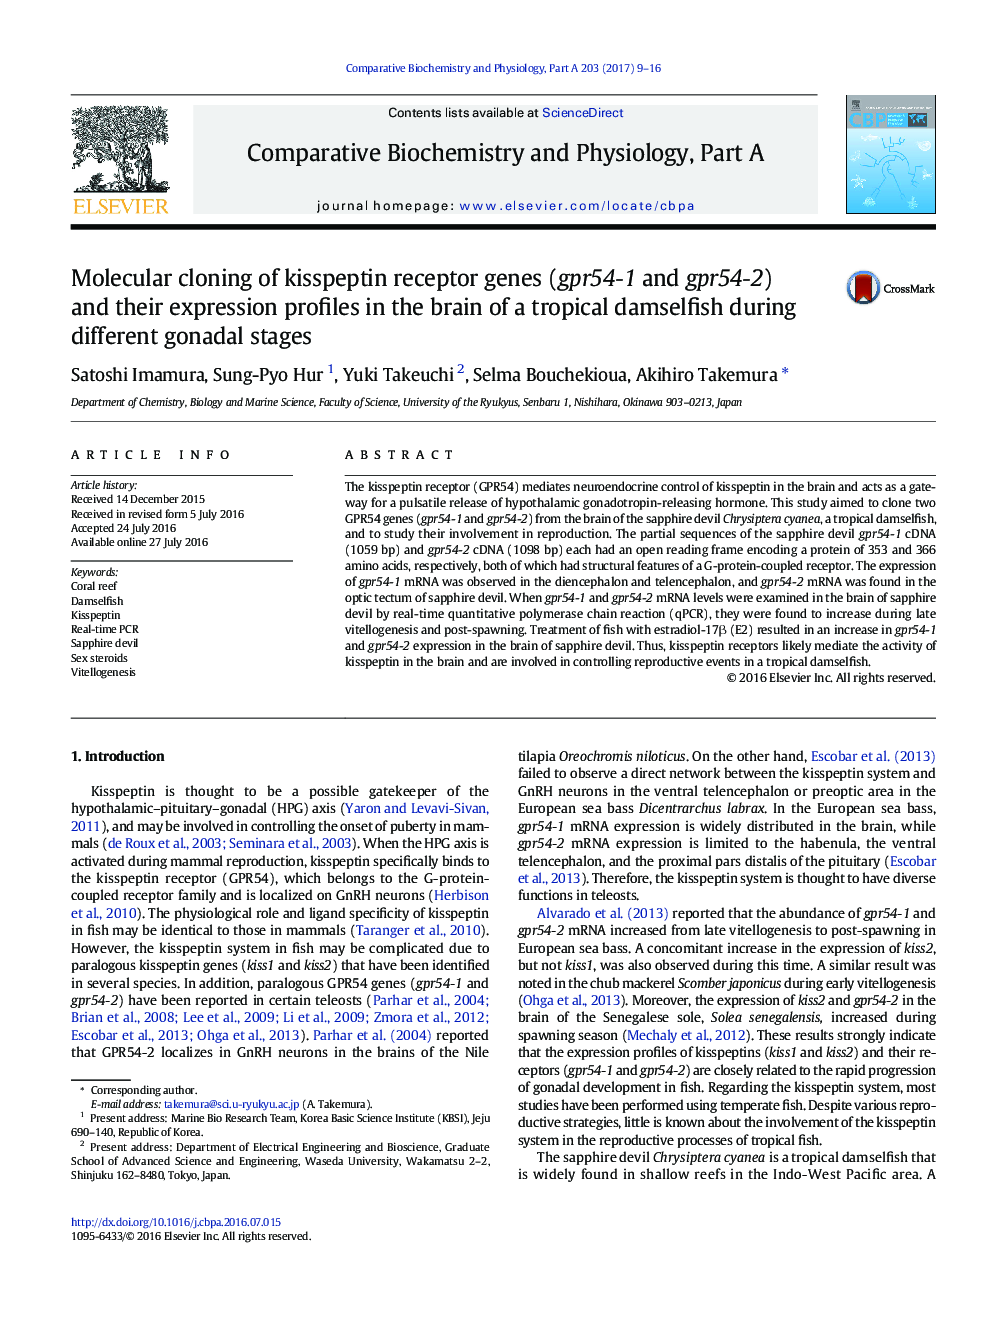 Molecular cloning of kisspeptin receptor genes (gpr54-1 and gpr54-2) and their expression profiles in the brain of a tropical damselfish during different gonadal stages